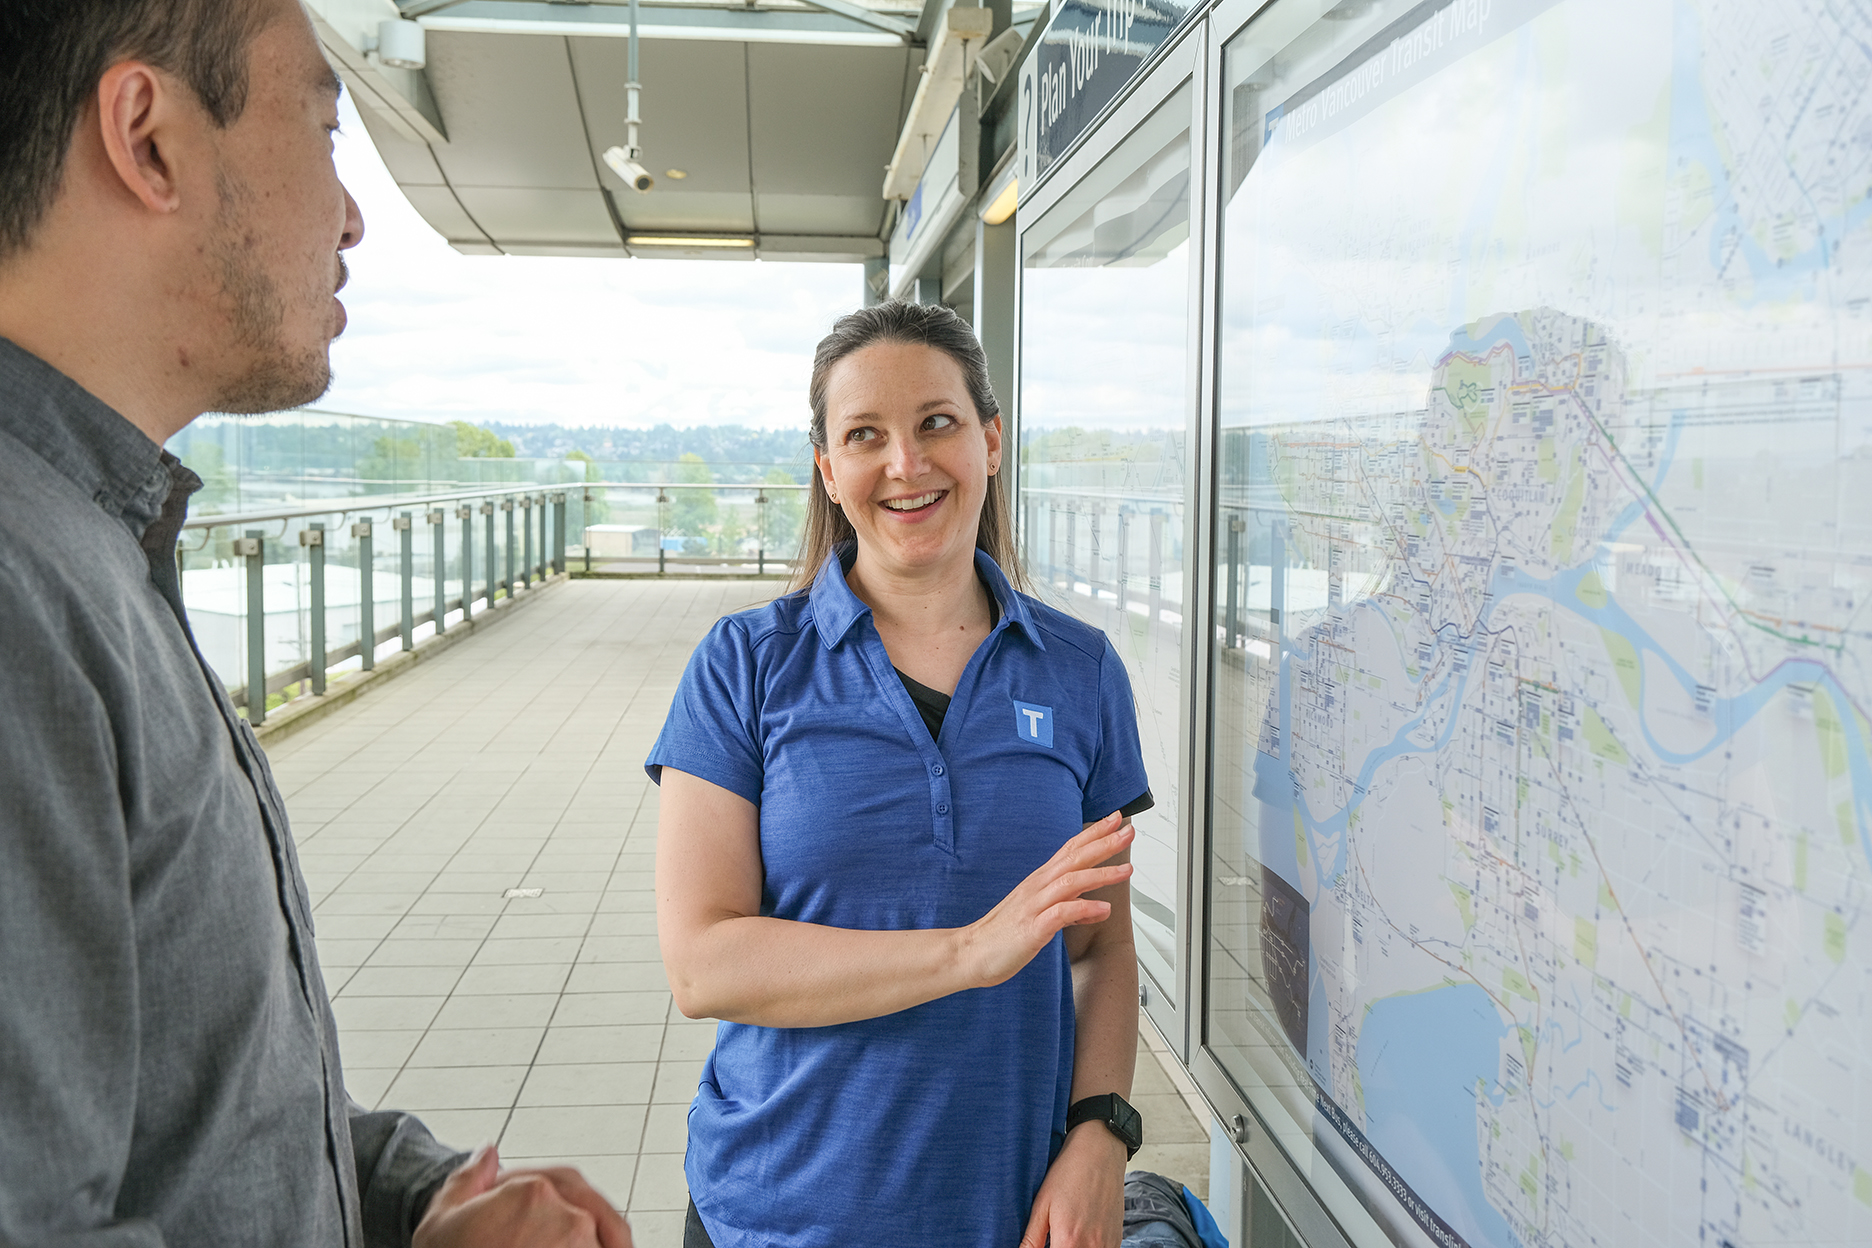 TransLink volunteer interacting with transit customer in front of transit system map.